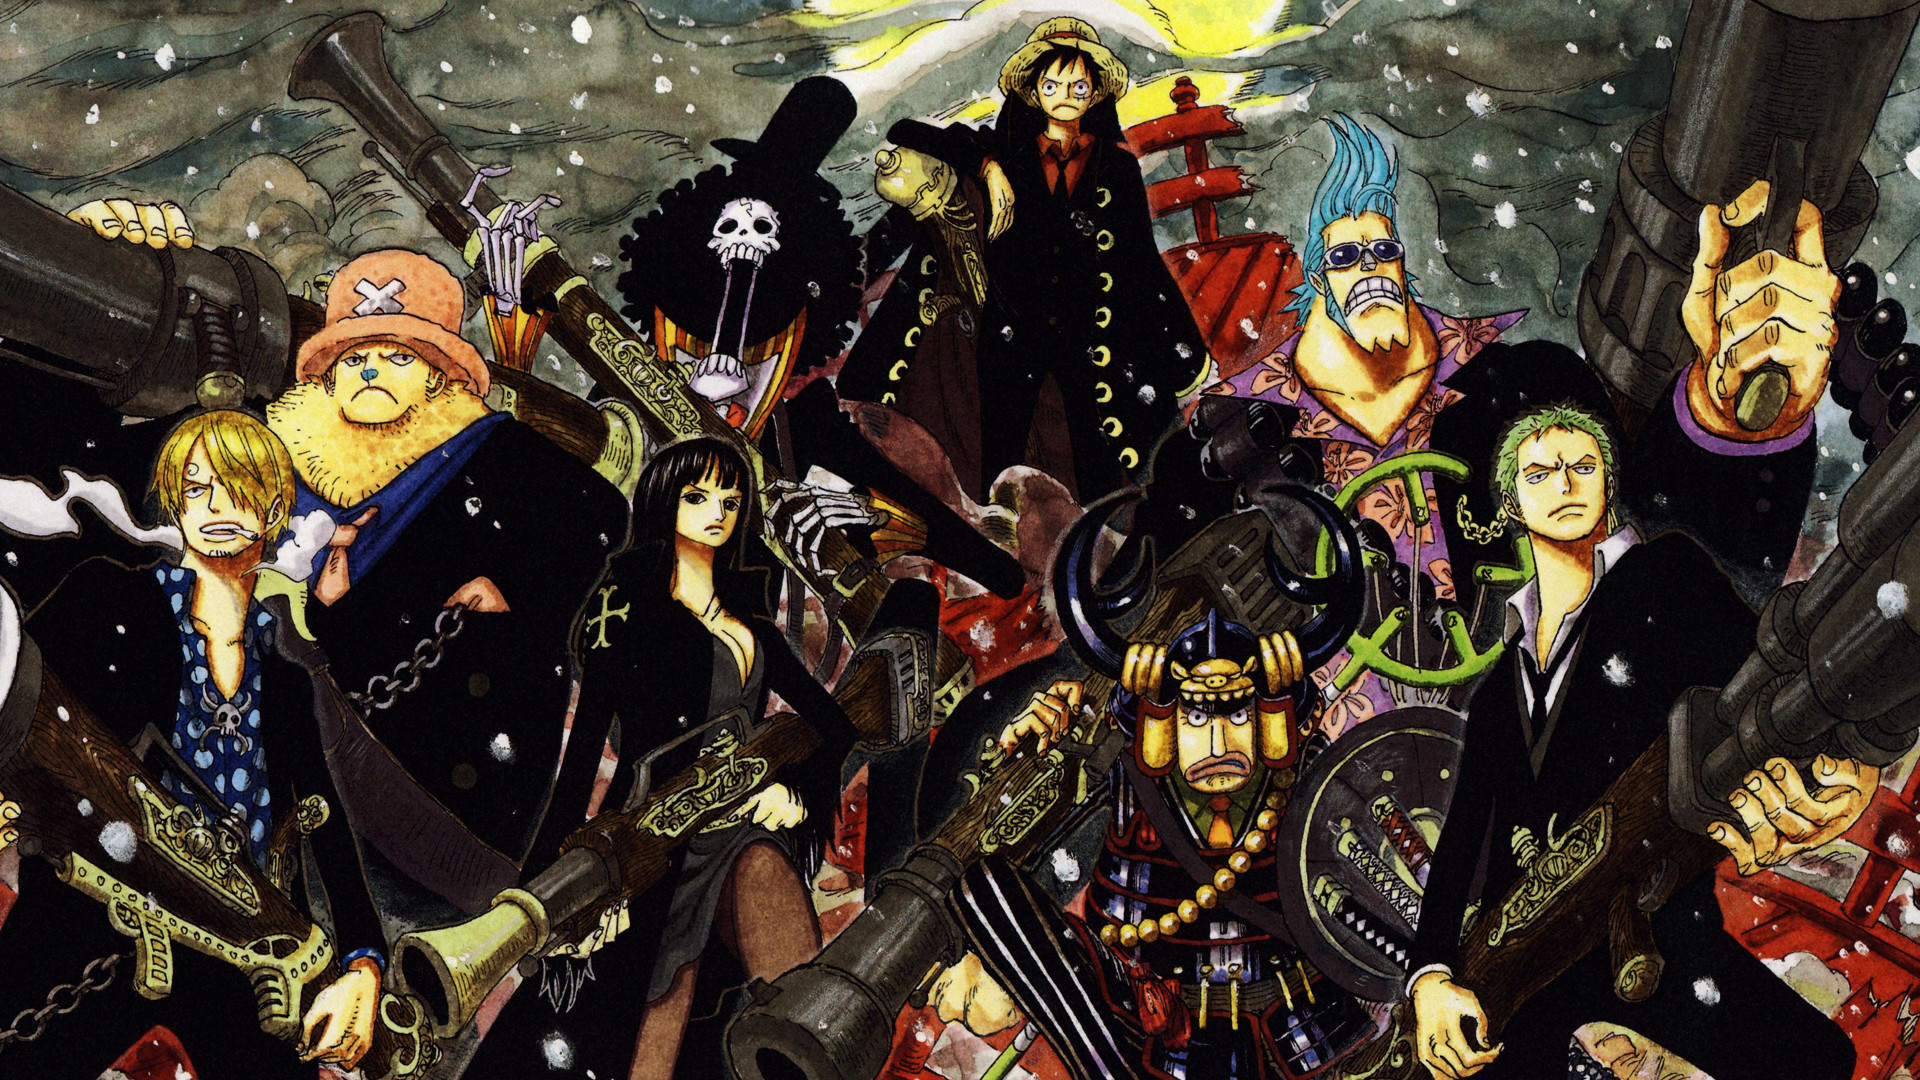 1920x1080 one piece crew wallpapers high definition with high resolution wallpaper on  anime category similar with after